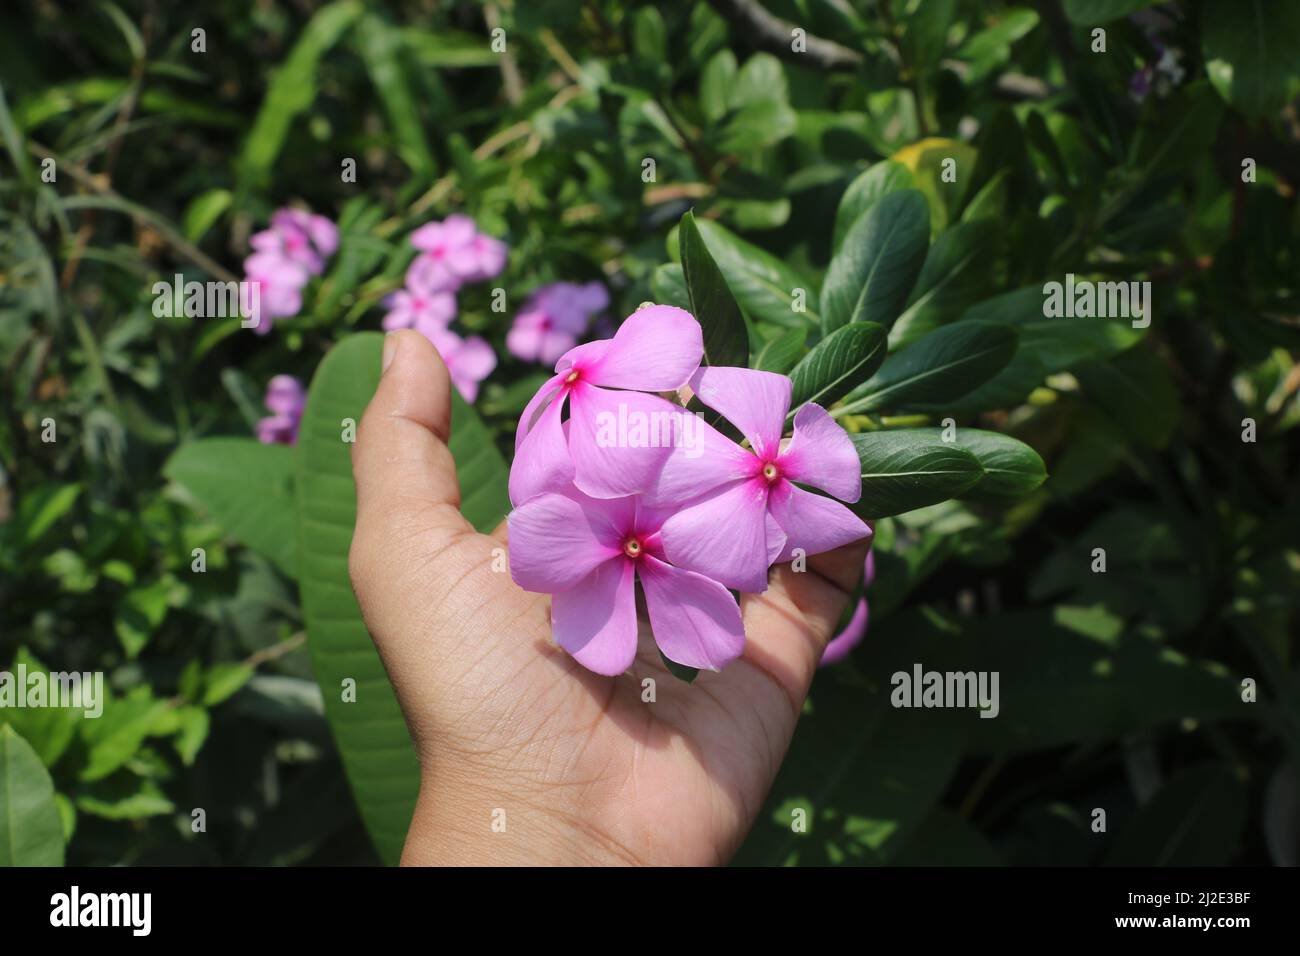 Pink Nayantara or vinca flower.In Bangladesh commonly known as nayantara.Also known Catharanthus roseus,commonly known as bright eyes,Cape periwinkle. Stock Photo